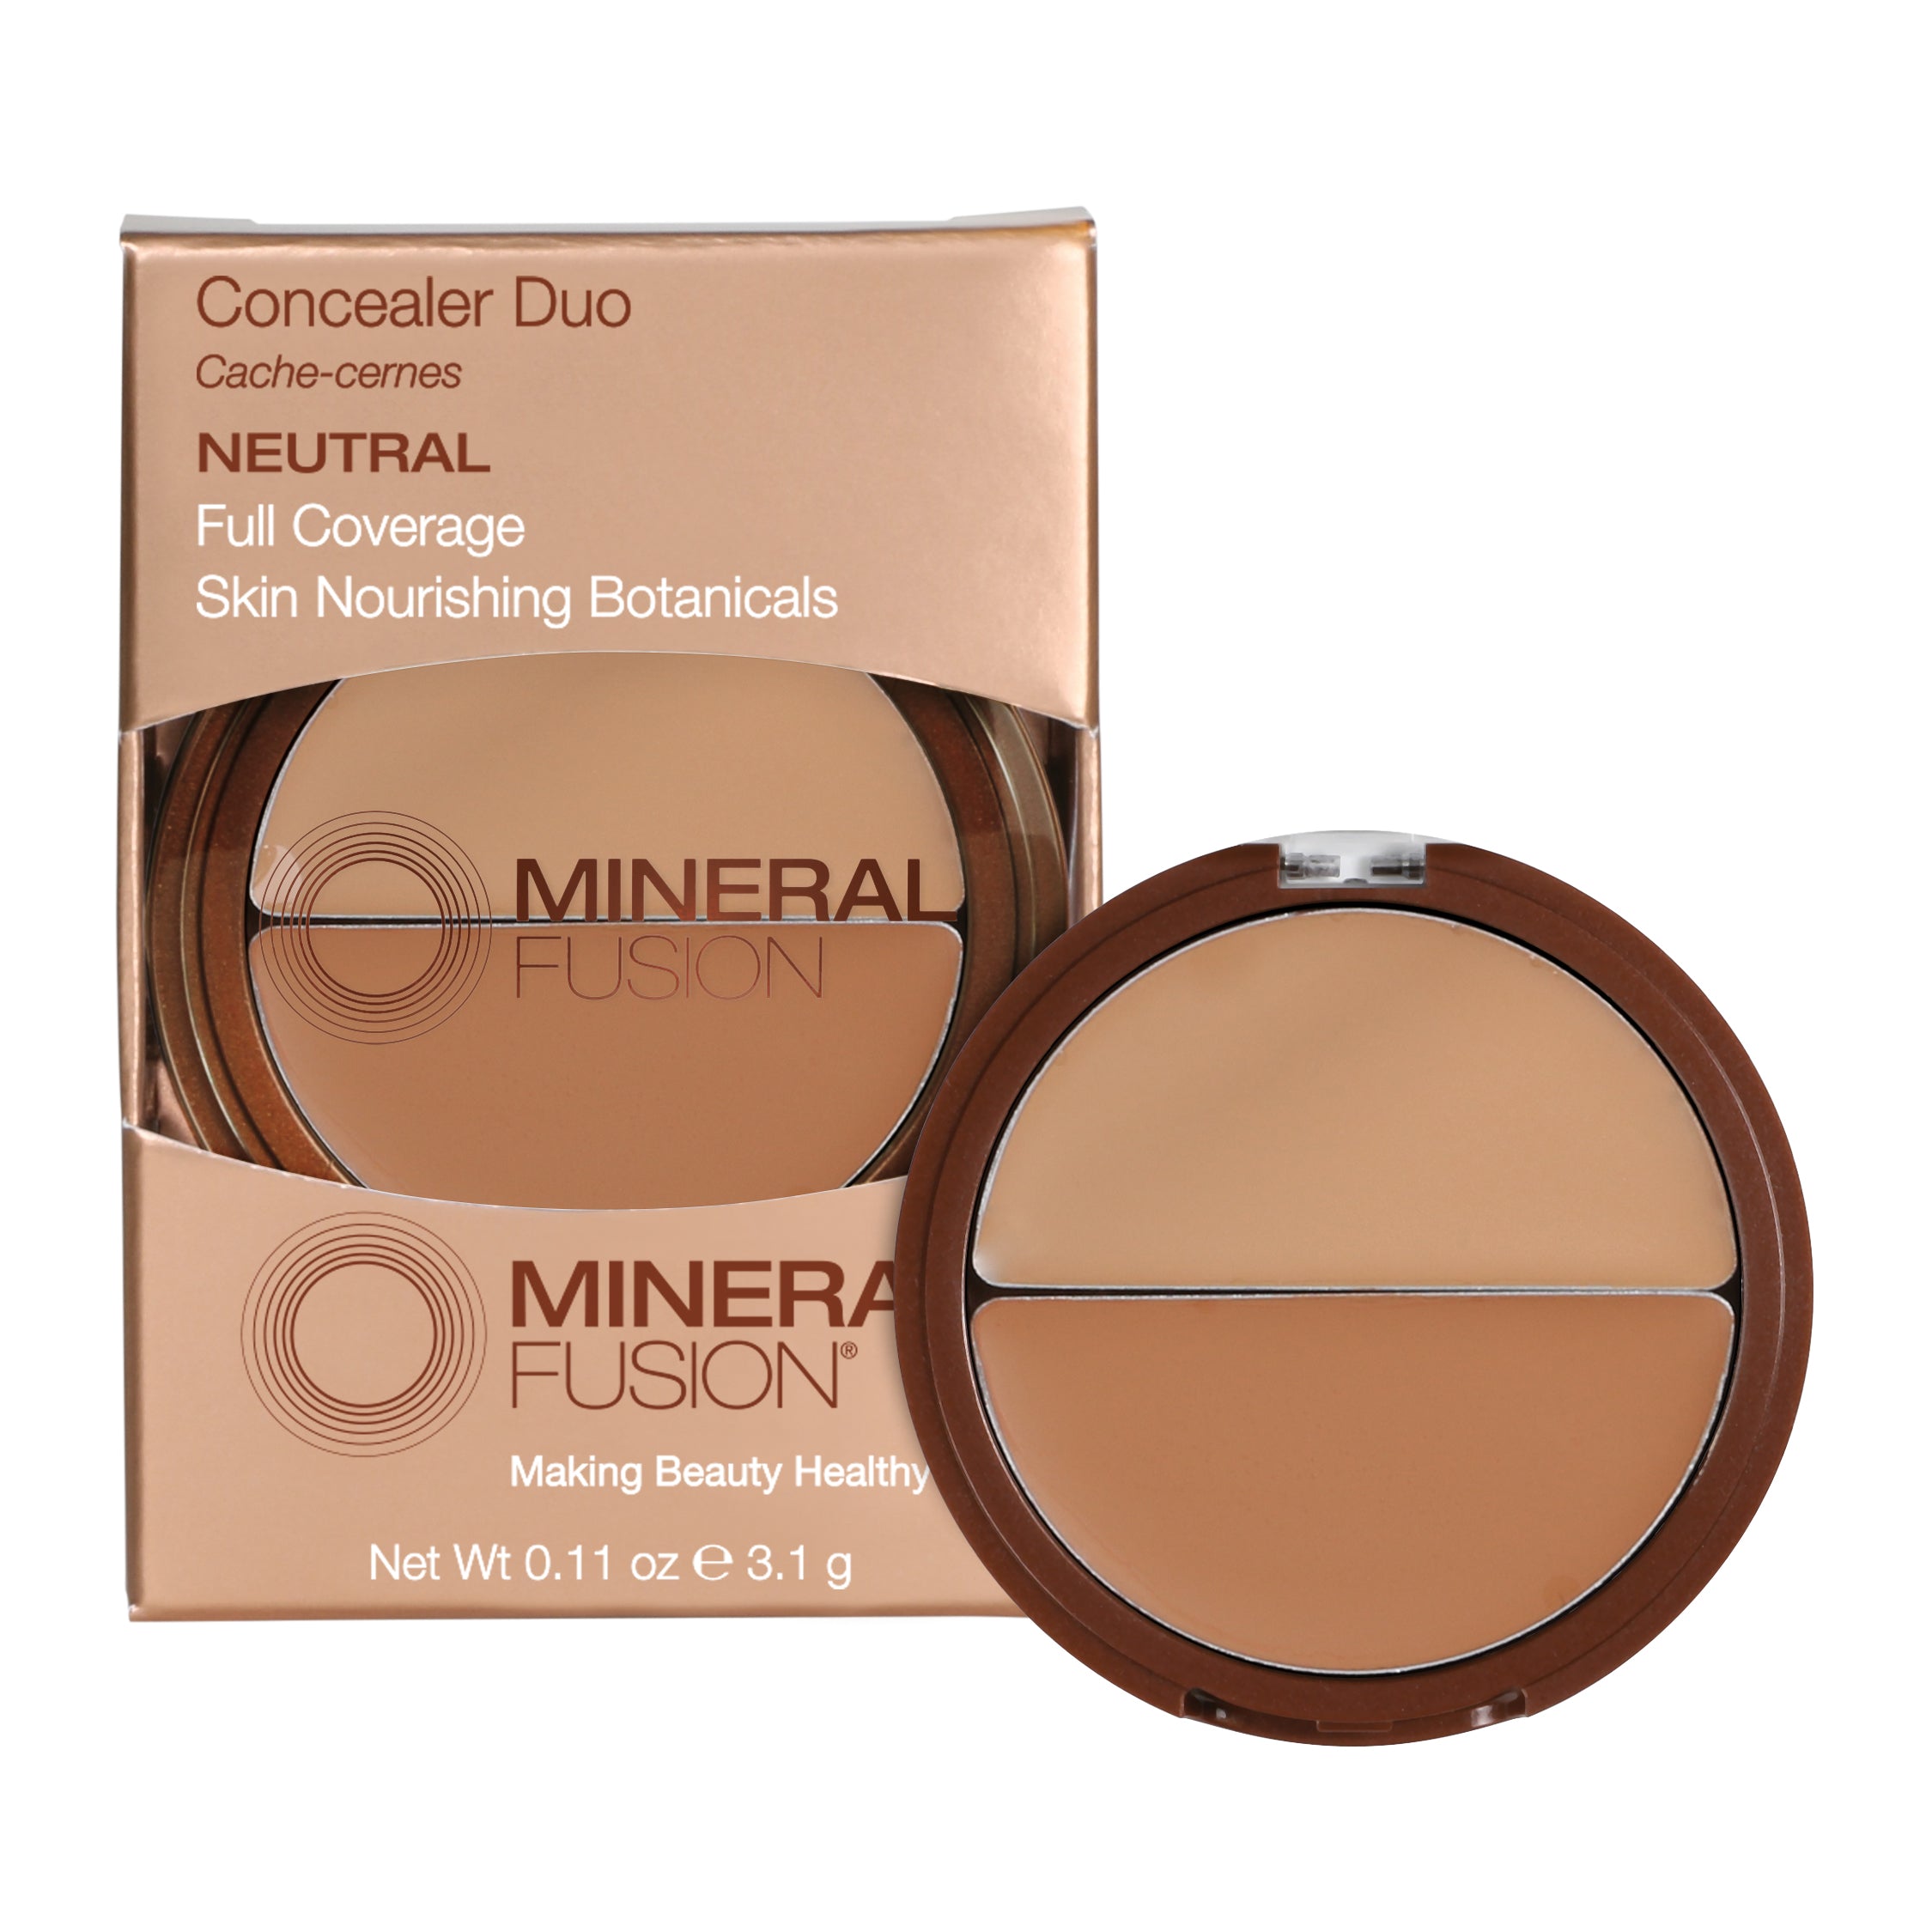 Concealer Duo - Mineral Fusion